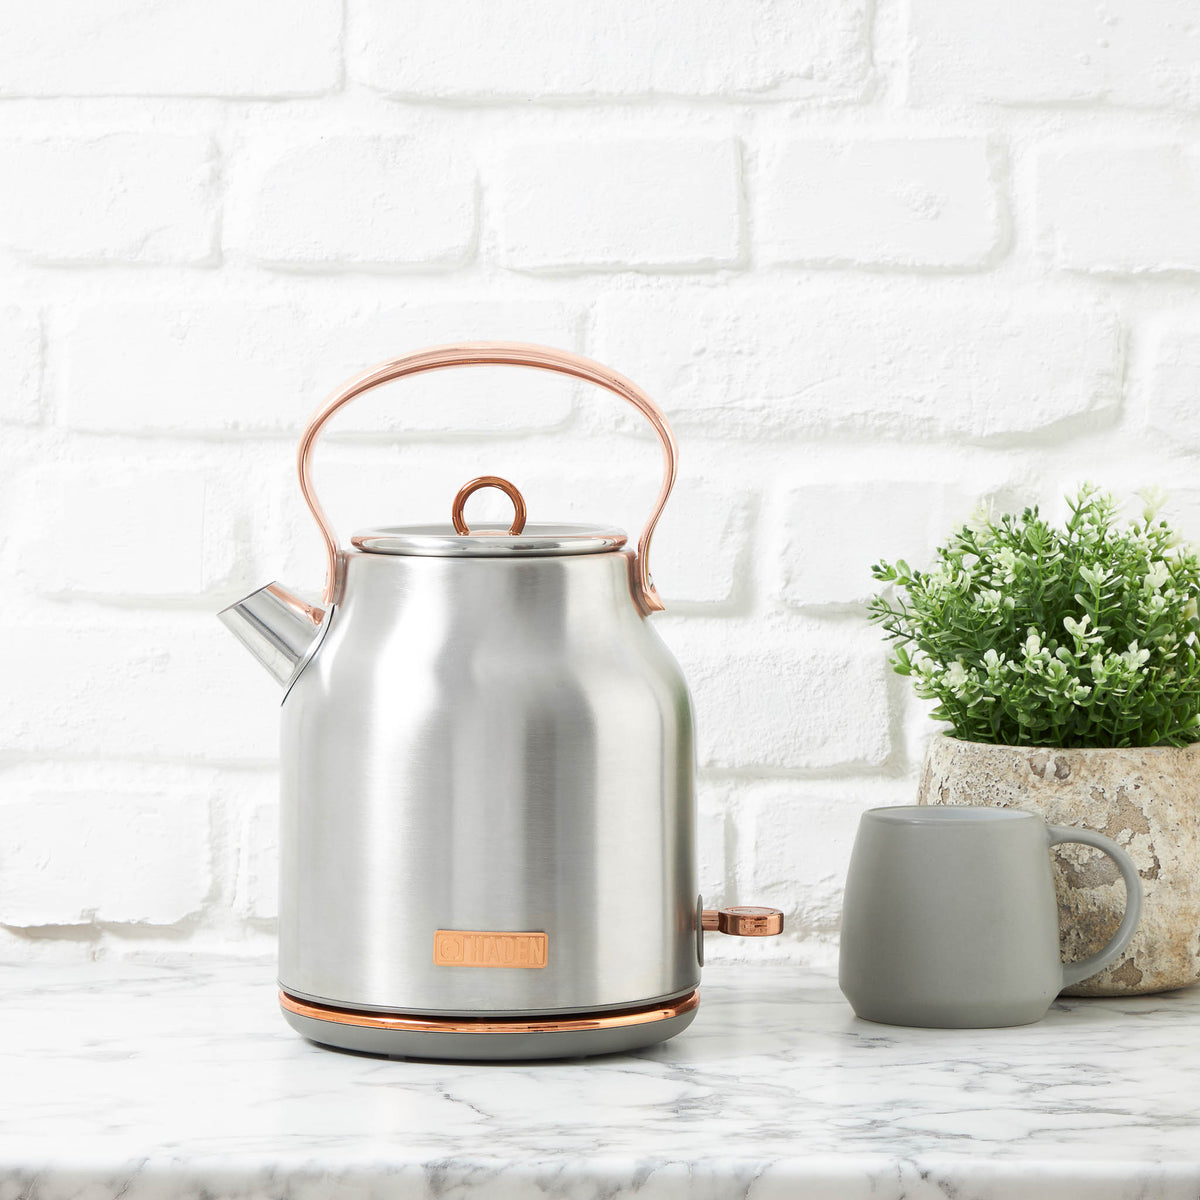 Haden Heritage Stainless Steel Electric Tea Kettle with Toaster